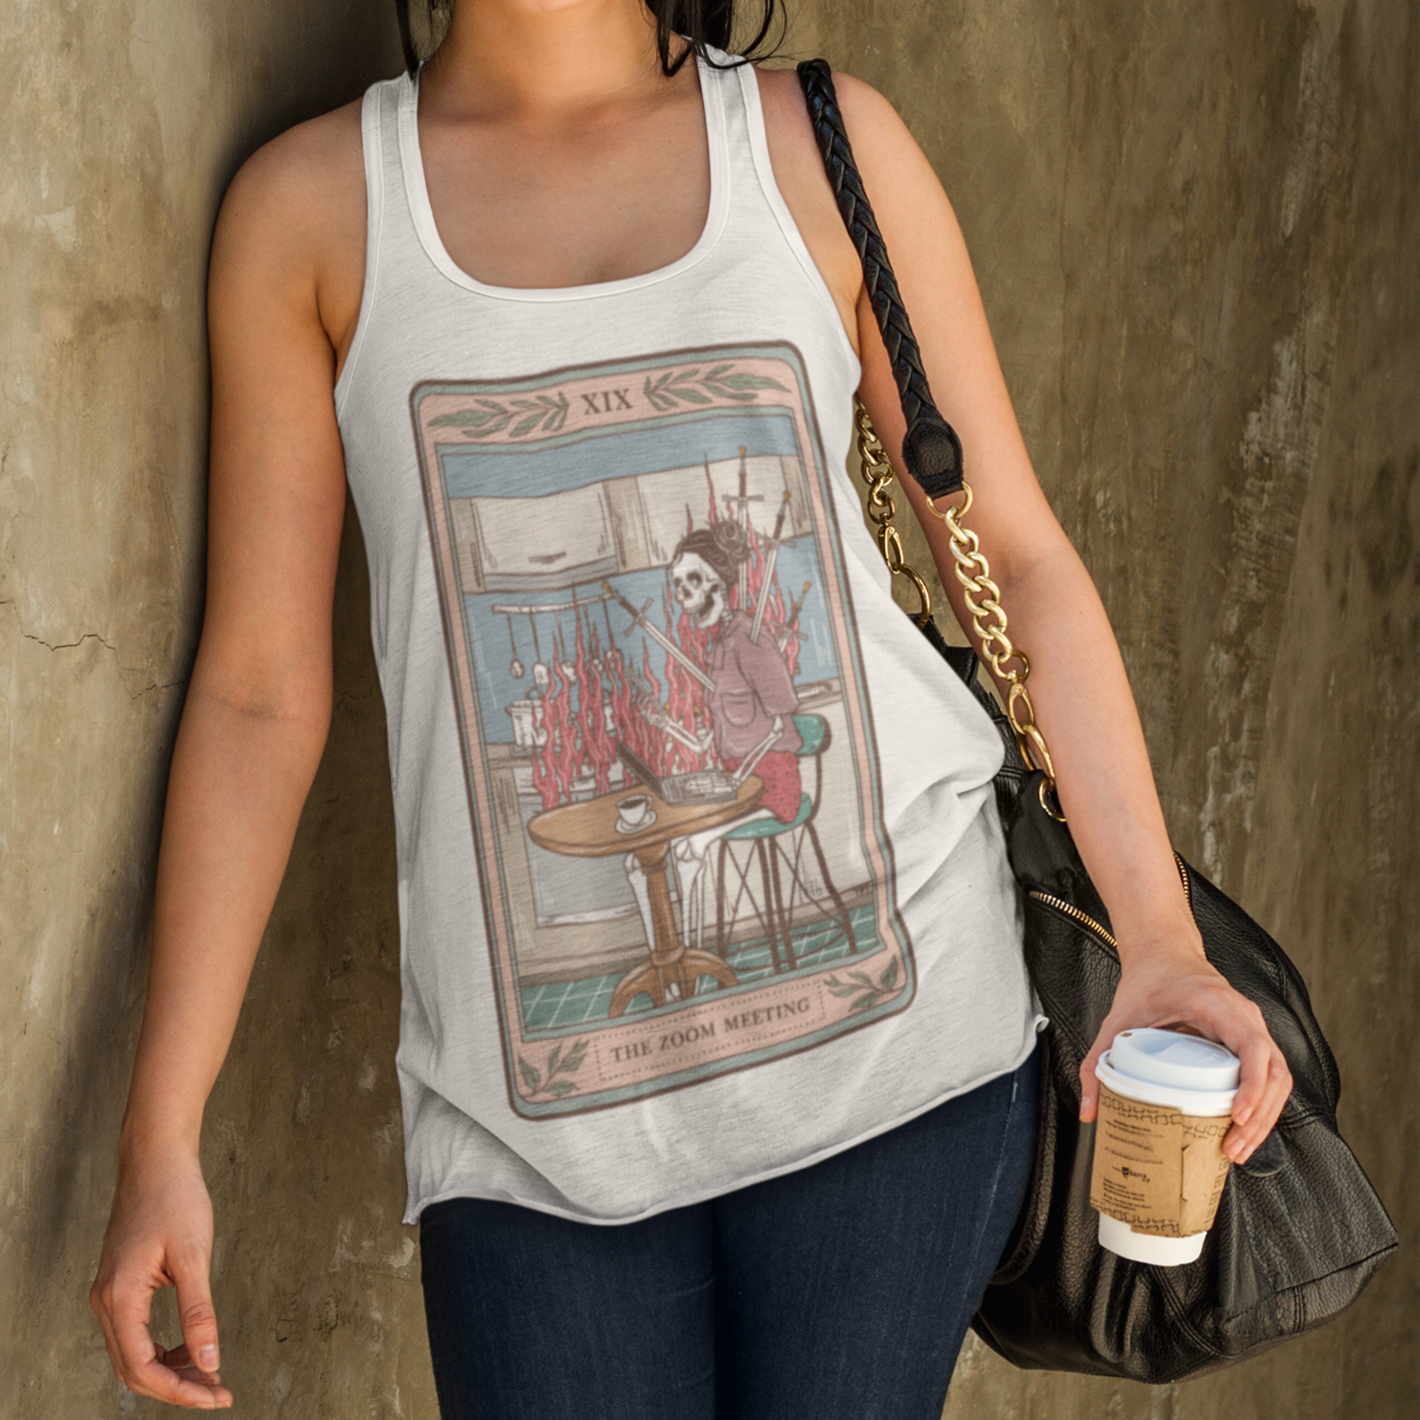 « THE ZOOM MEETING » WOMEN'S SLOUCHY or RACERBACK TANK